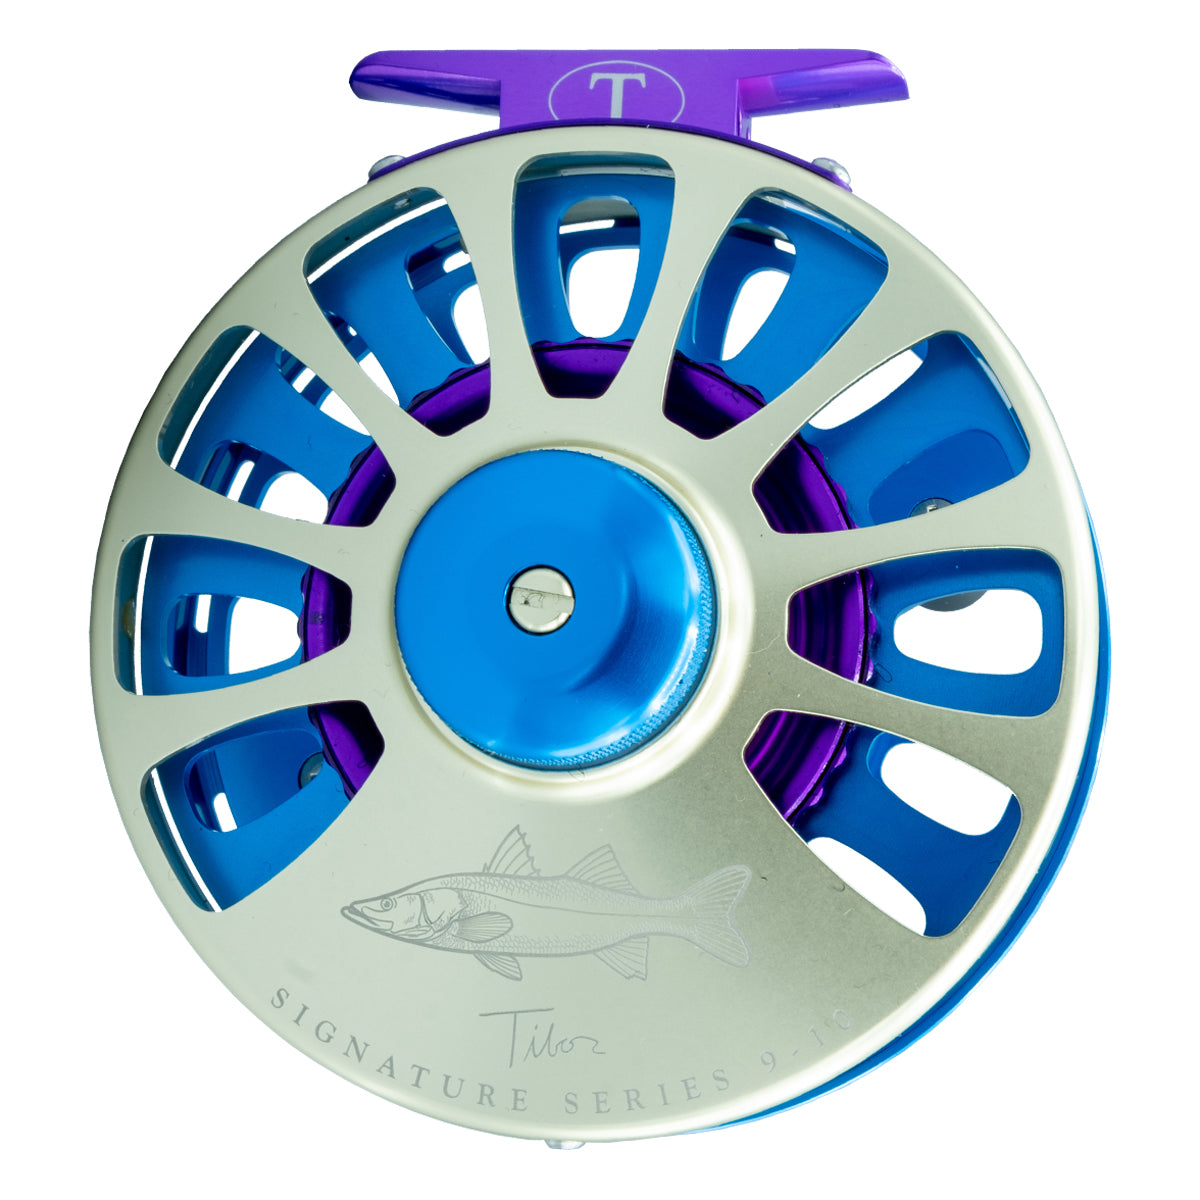 Tibor Signature Series Reel 9-10 Custom Gold with Violet Hub and